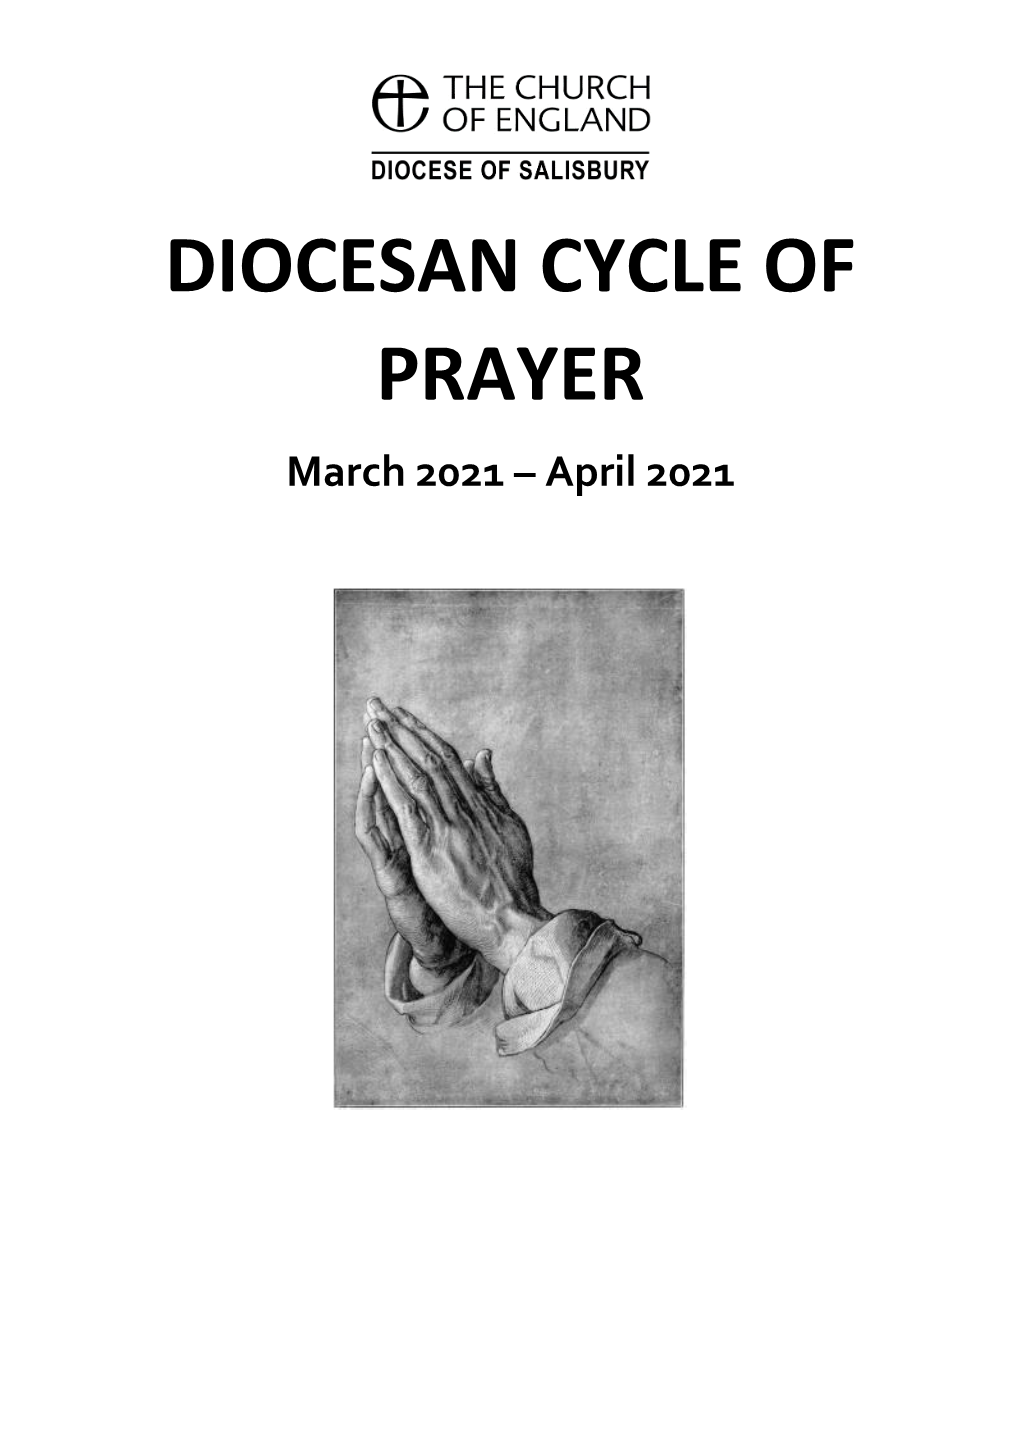 DIOCESAN CYCLE of PRAYER March 2021 – April 2021